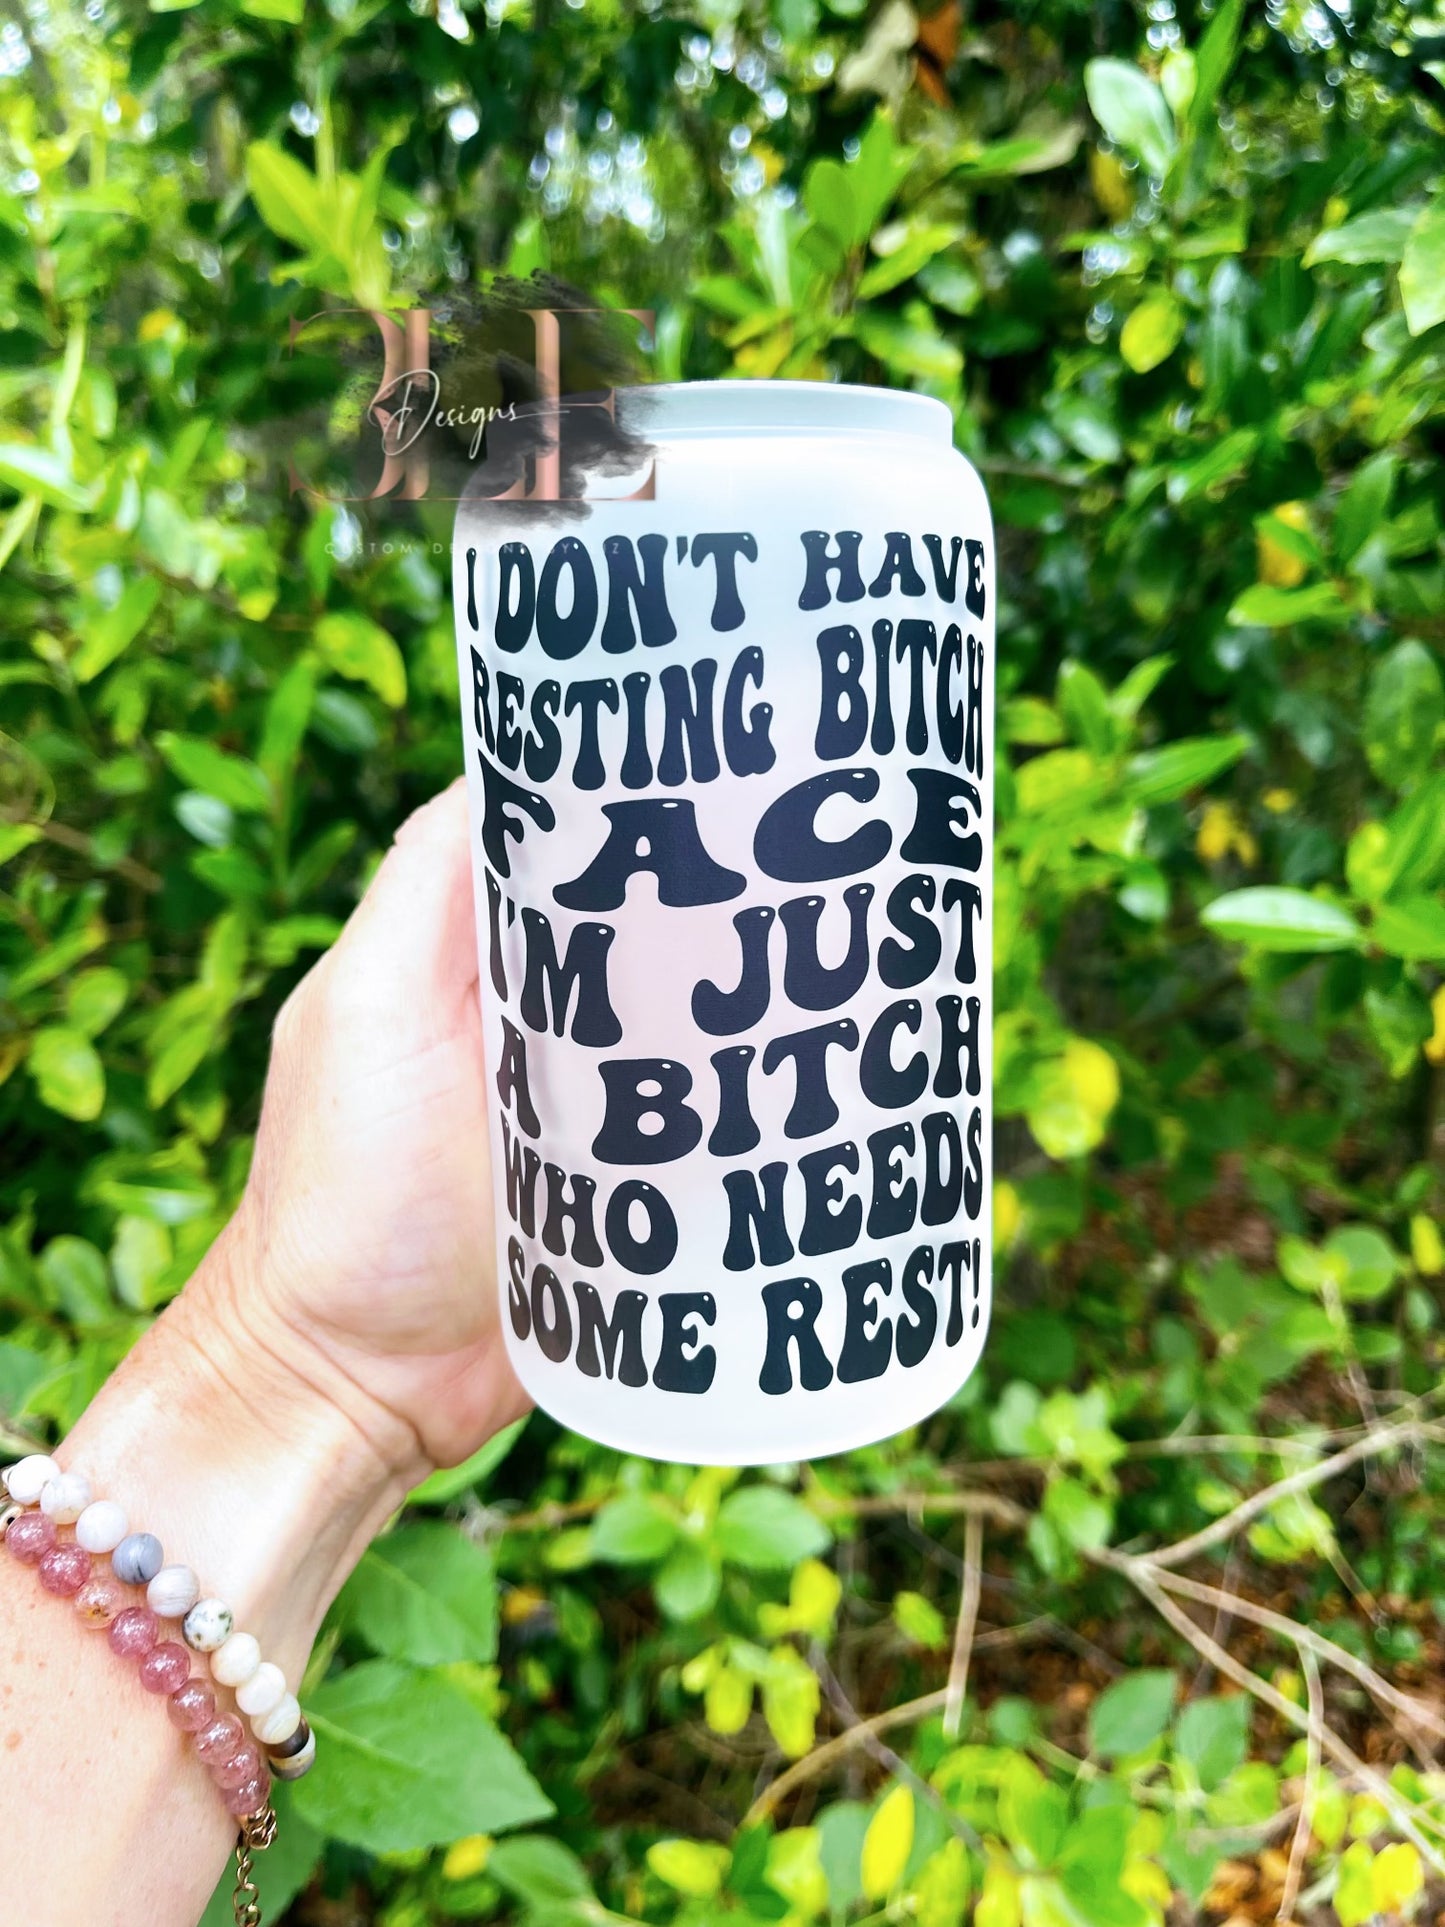 I Don't Have A Resting Bitch Face Im Just a Bitch Who Needs Some Rest frosted Glass Cup, Funny Gift Idea For Friend, Funny Glass Tumbler